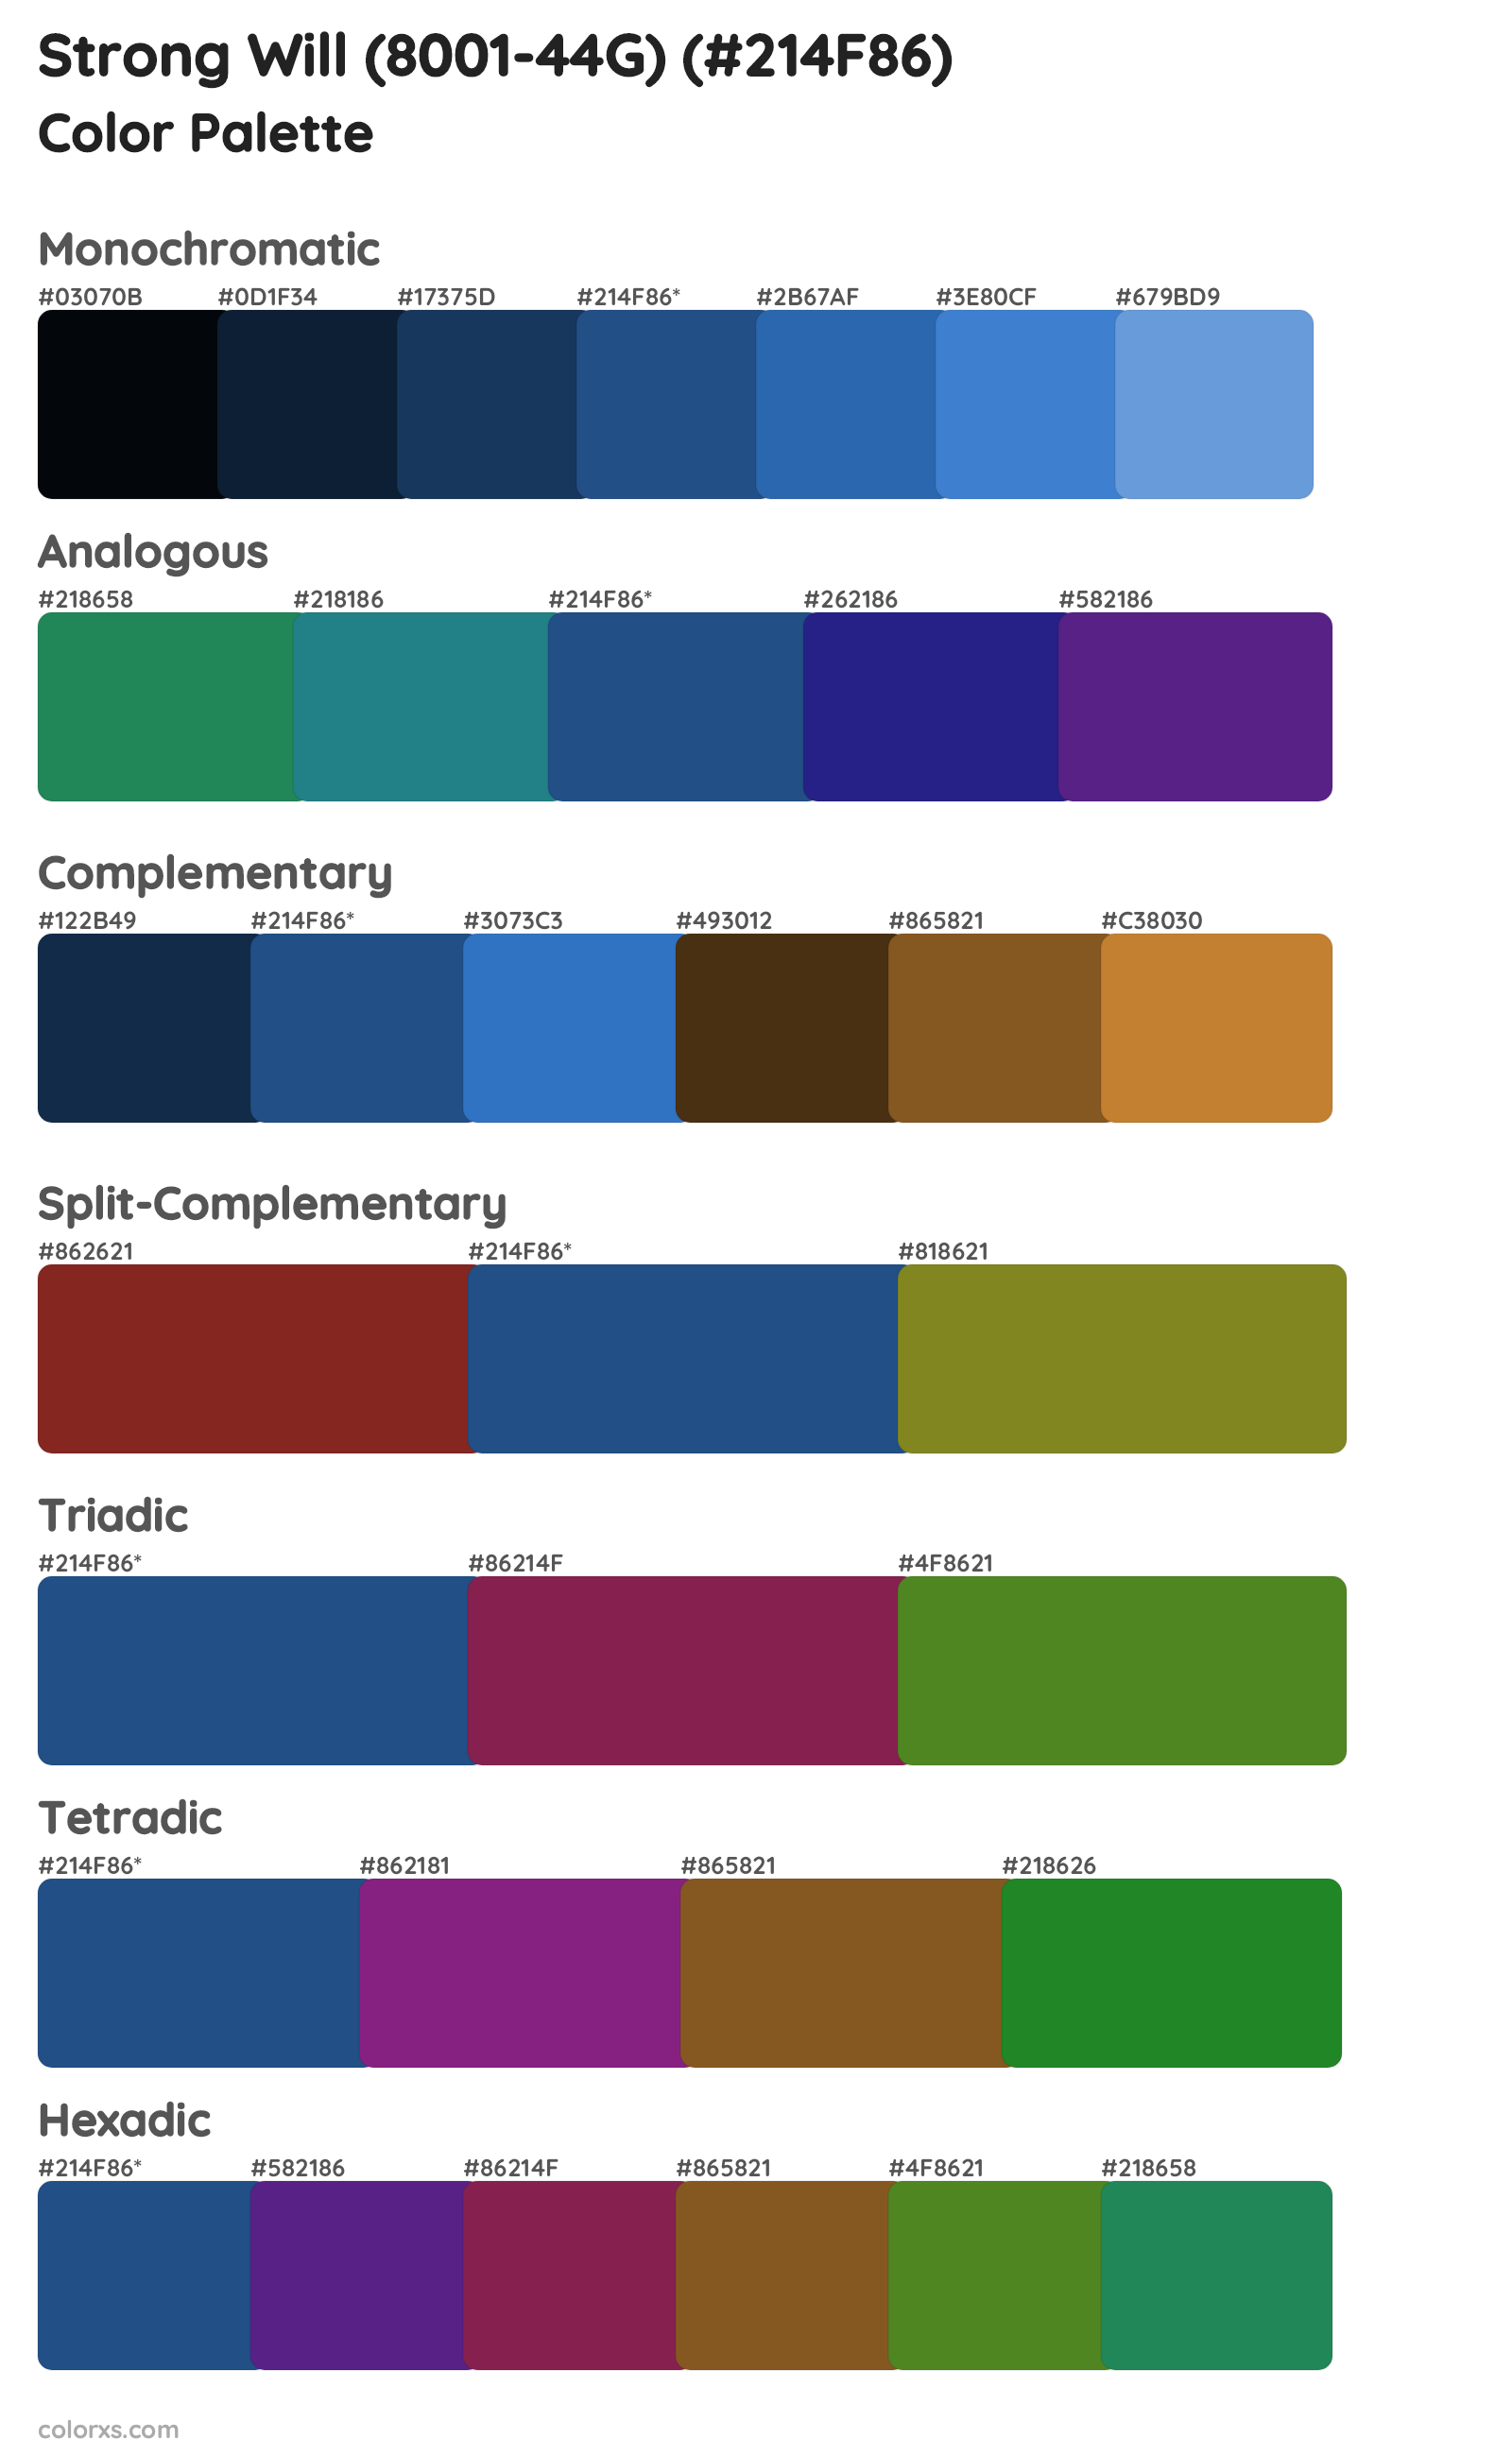 Strong Will (8001-44G) Color Scheme Palettes